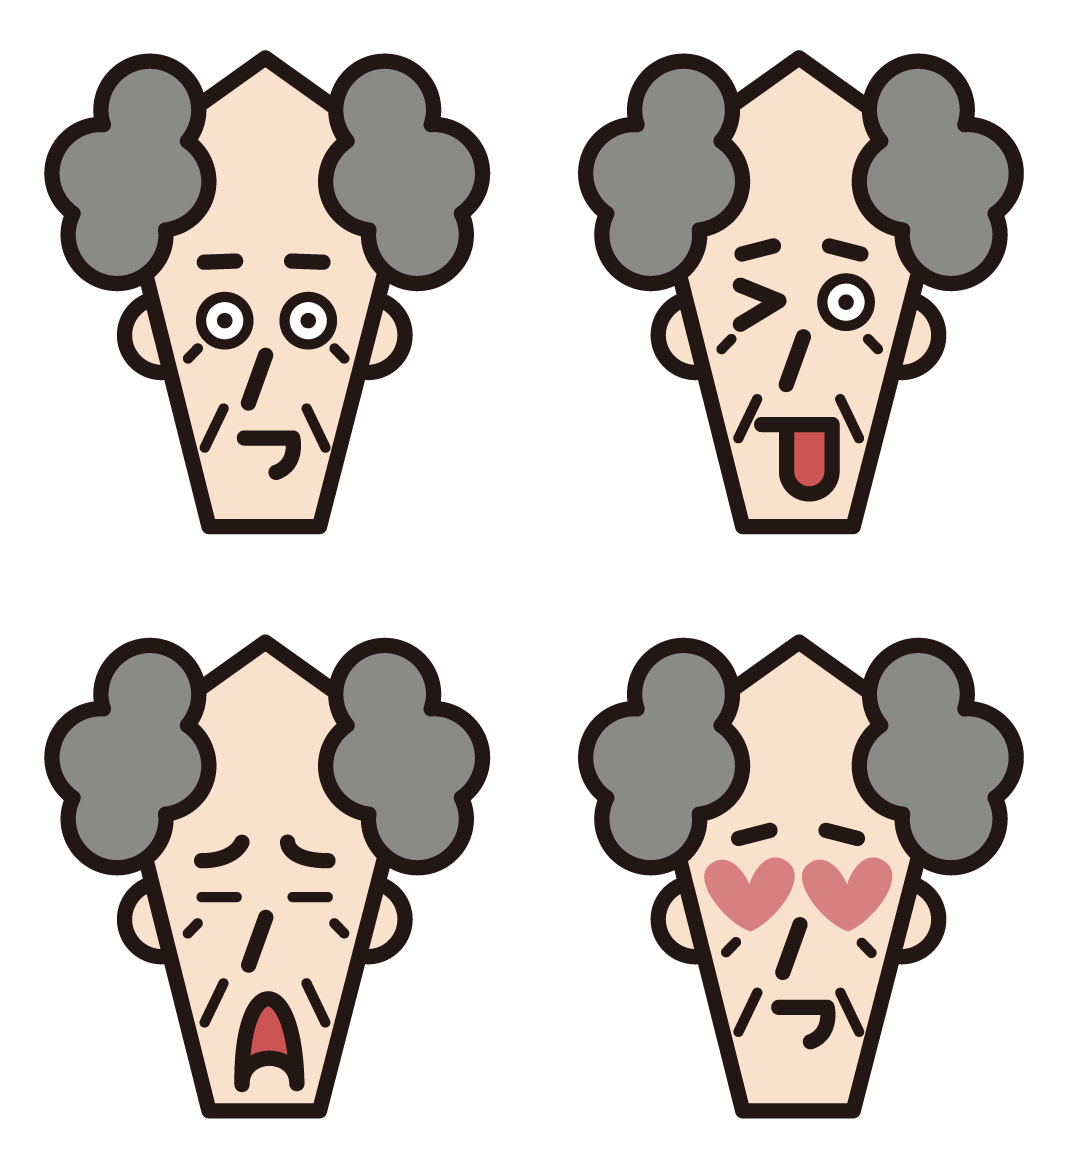 Illustration of the grandfather's various facial expressions (disheveled hairstyle) 1